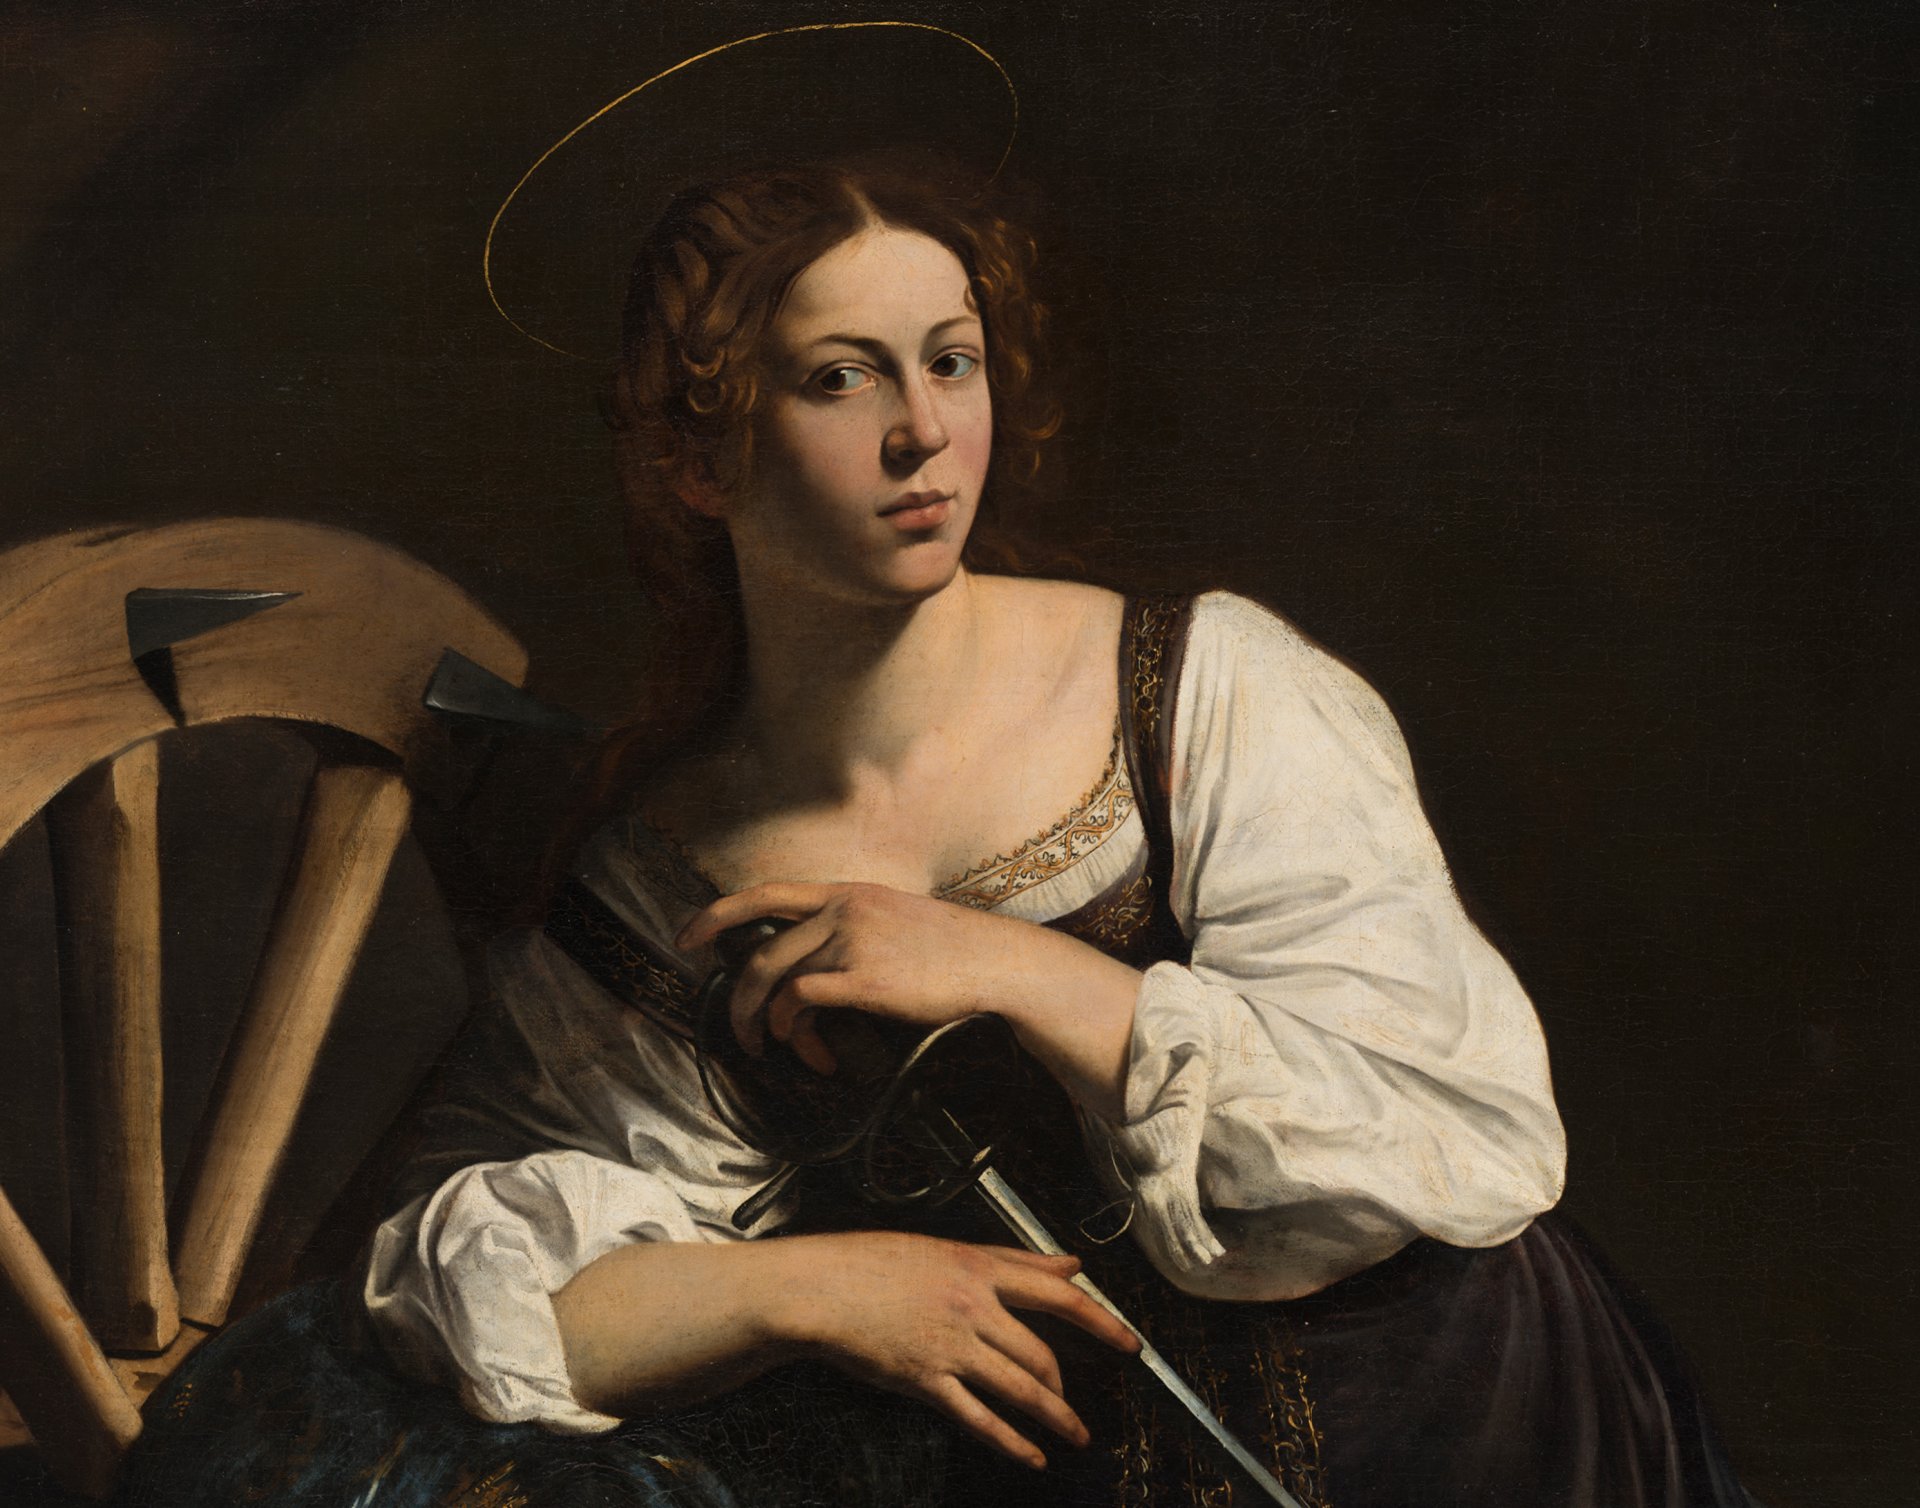 Detail of the painting "Saint Catherine of Alexandria" by Caravaggio, before restoration.